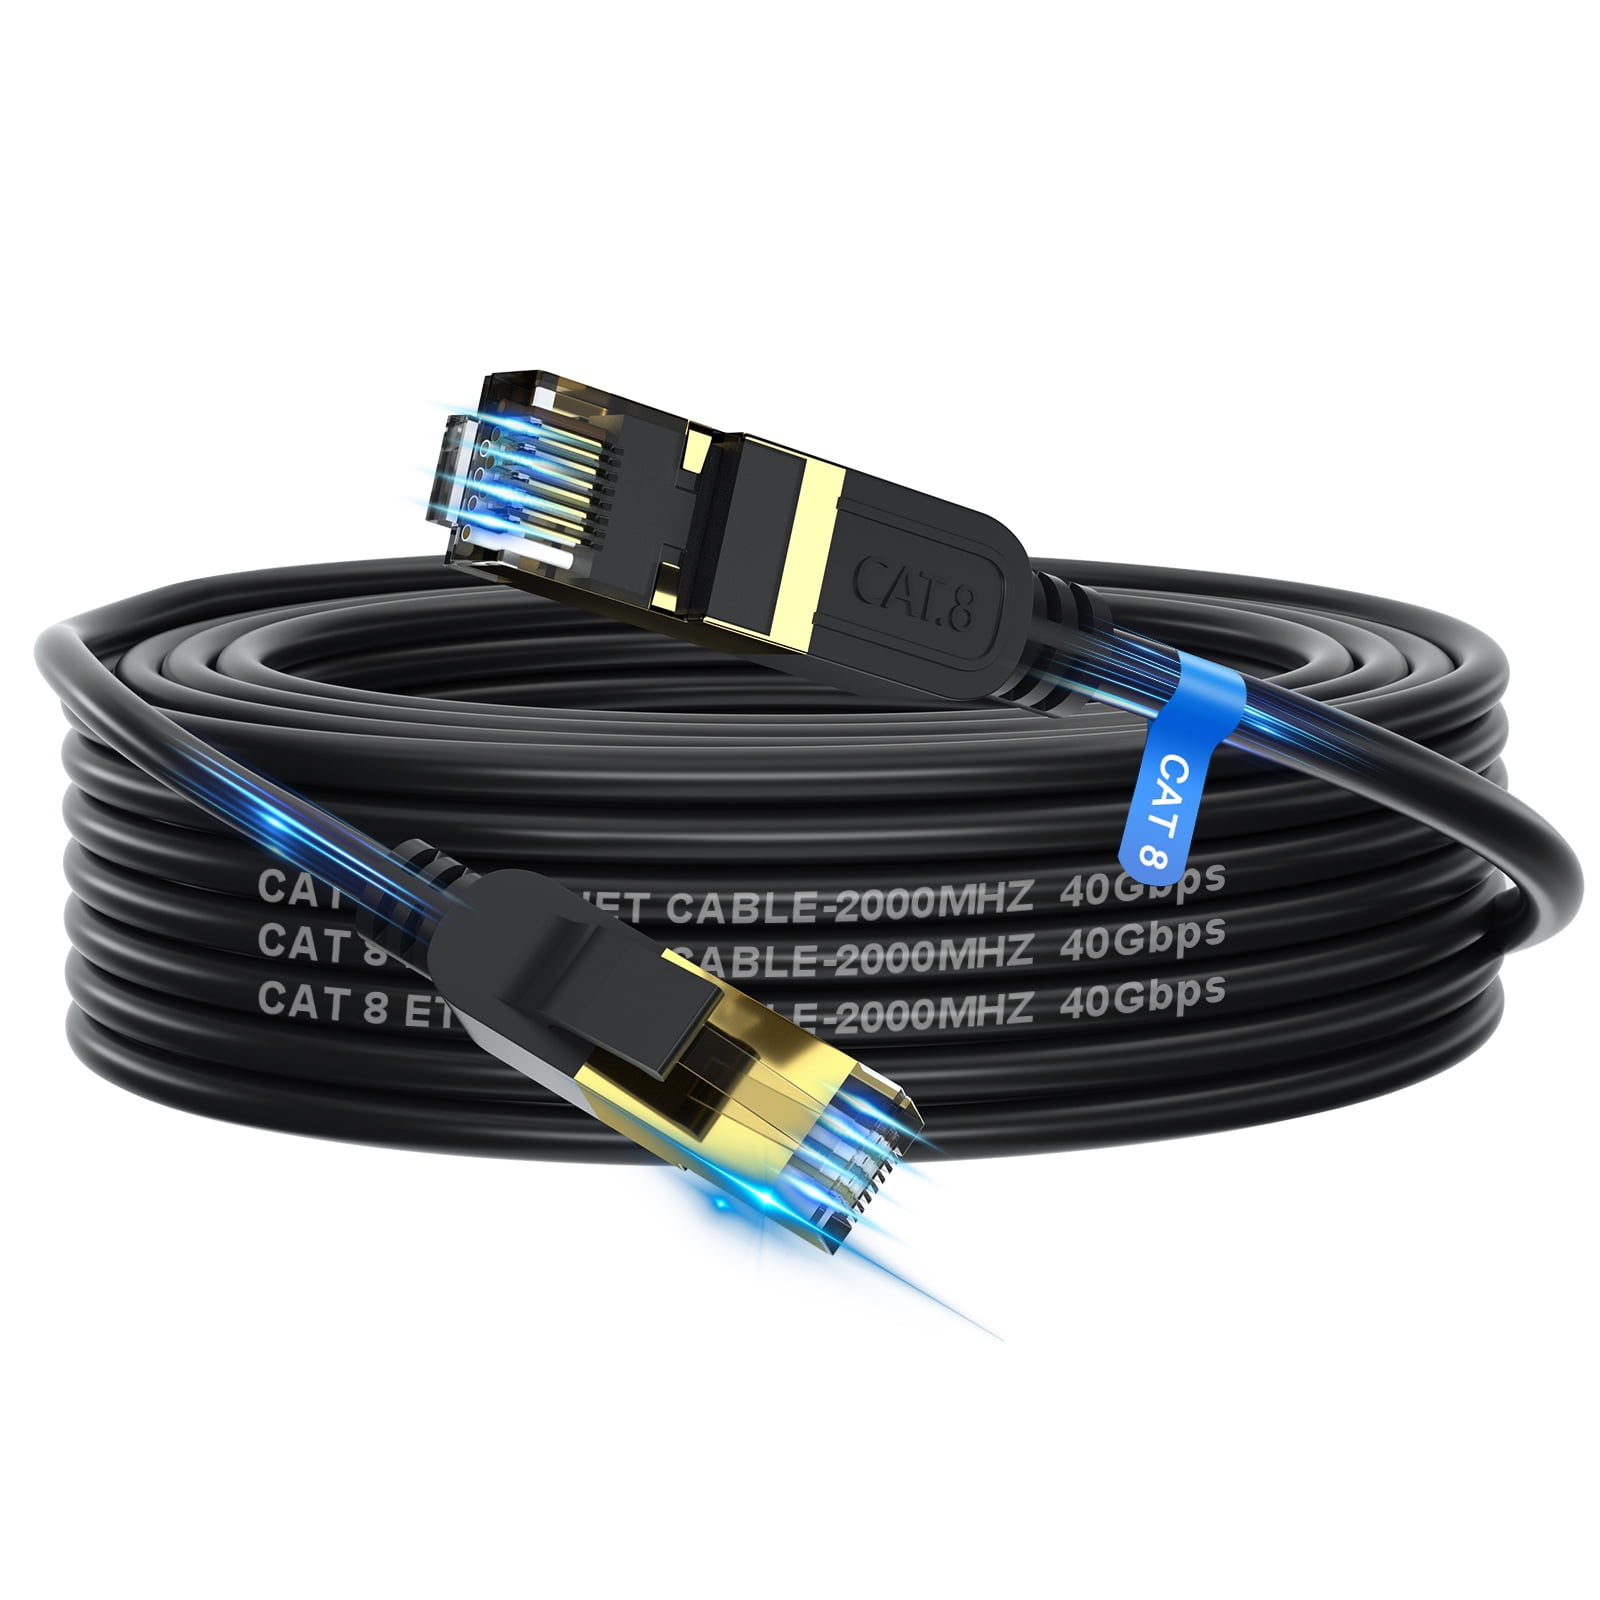 Tesmax Cat 8 Ethernet Cable 6FT, High Speed Gaming Internet Cable